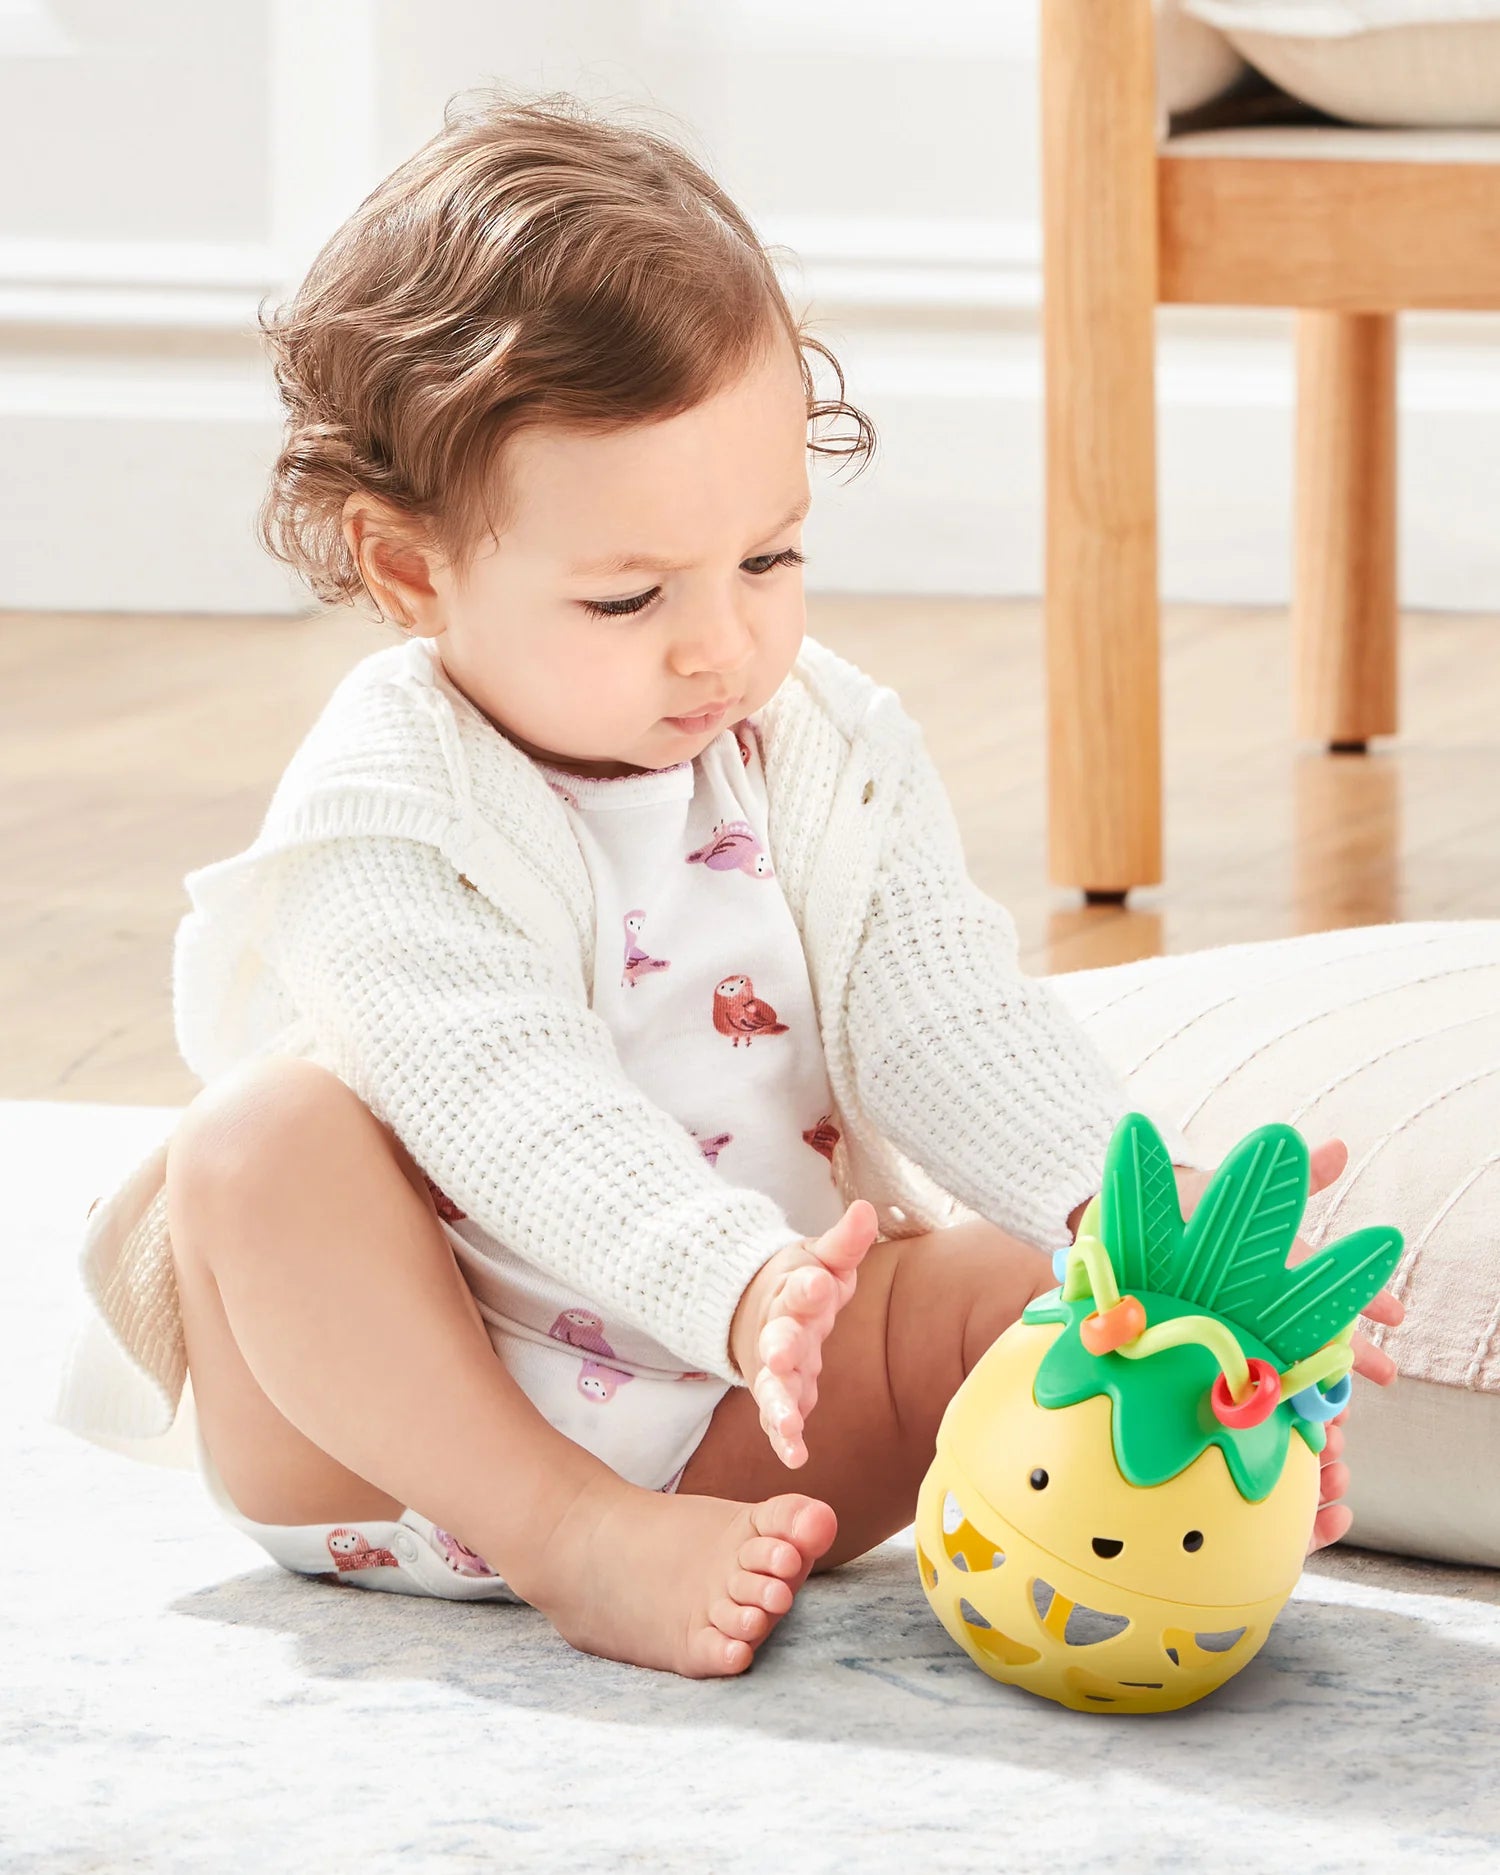 Skip Hop Farmstand Roll Around Pineapple Rattle Baby Toy - Tiny Tots Baby Store 